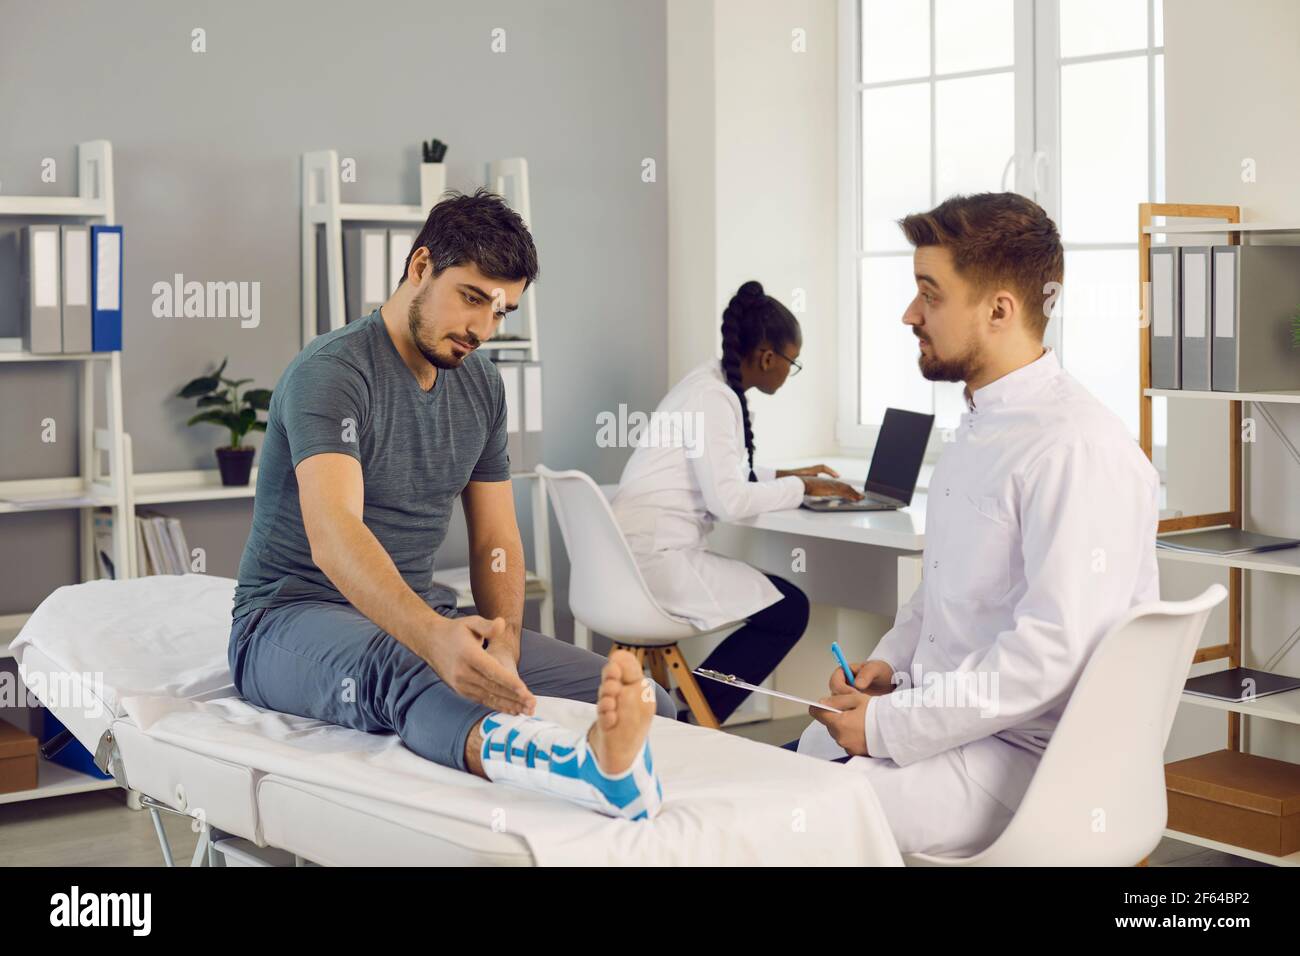 Male doctor and man patient during check-up for leg injury in hospital ward Stock Photo